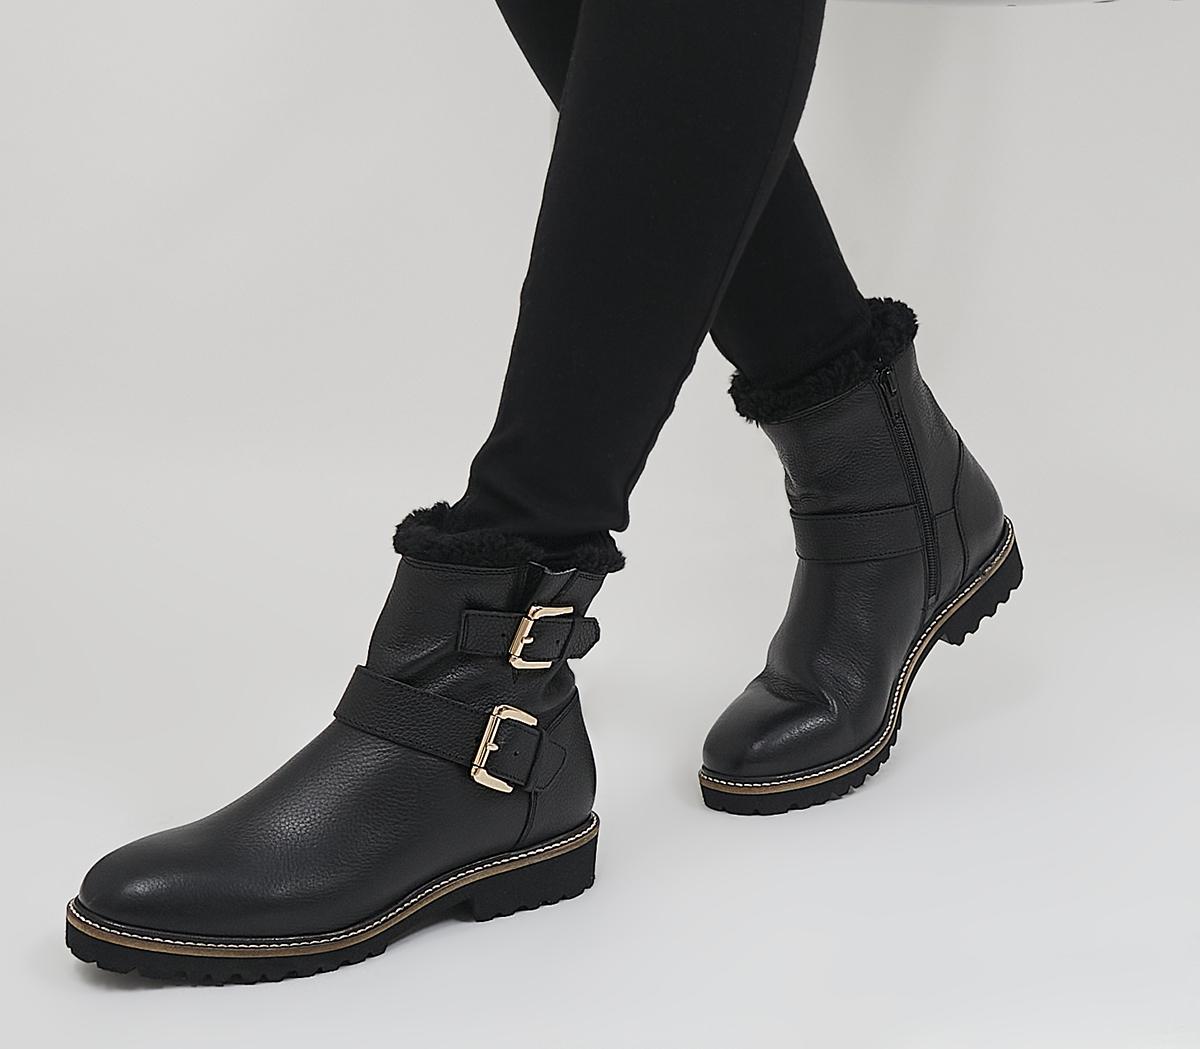 OfficeApologetic Fur-Trimmed Buckle Flat Ankle BootsBlack Leather